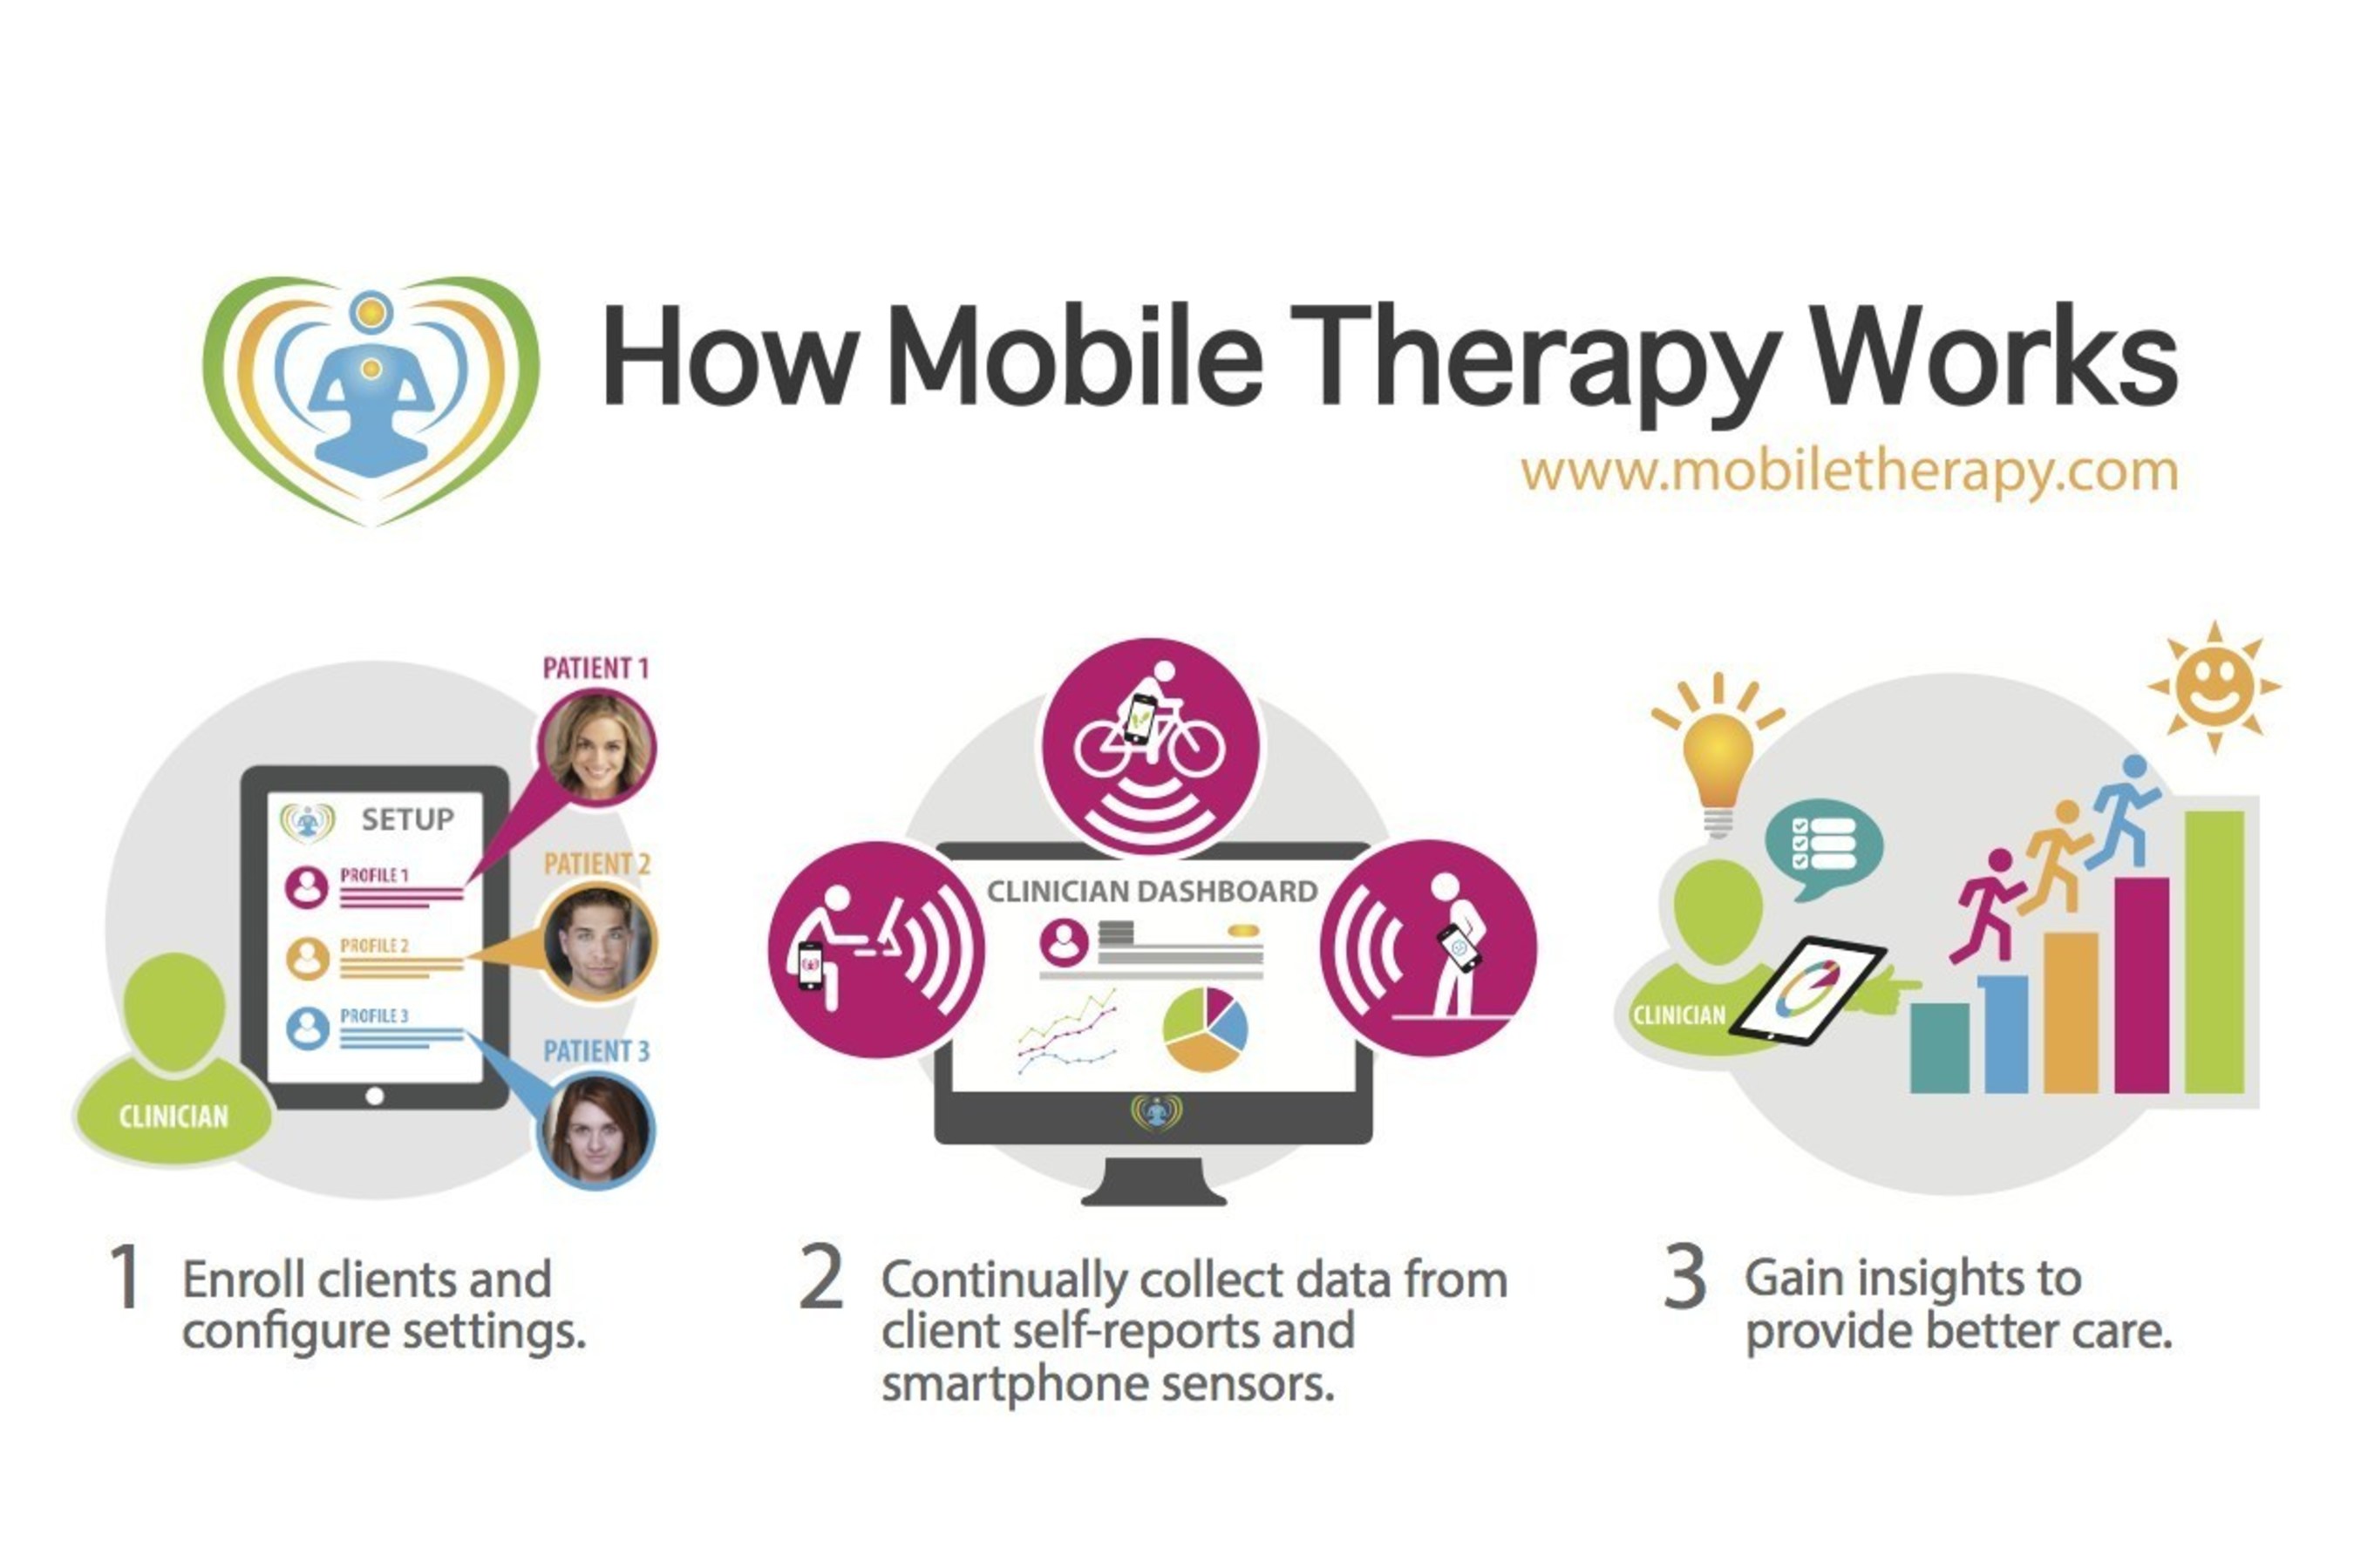 Technology for Therapists:  SelfEcho's Mobile Therapy provides mental health clinicians with patient data between therapy visits to accelerate diagnoses and improve care.  For more information, please visit www.mobiletherapy.com.